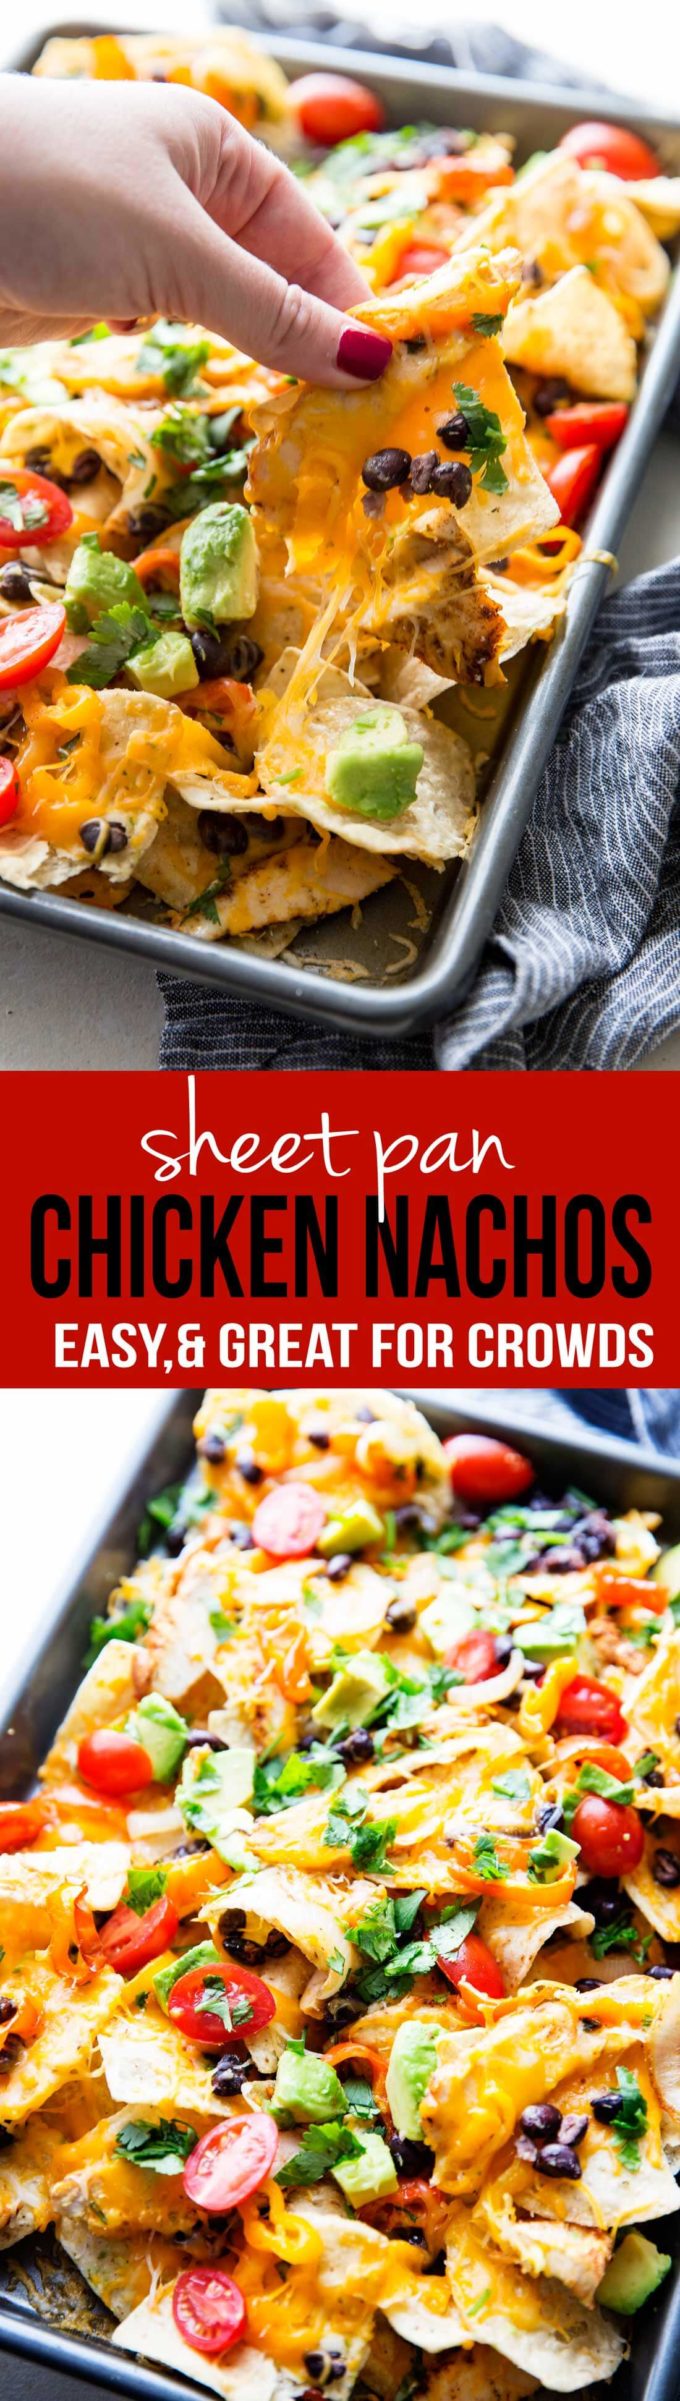 Chicken Nachos: These nachos are ultra filling, easy to make, and are loaded with crunchy chips, melty cheese, flavorful chicken, and your favorite toppings! 